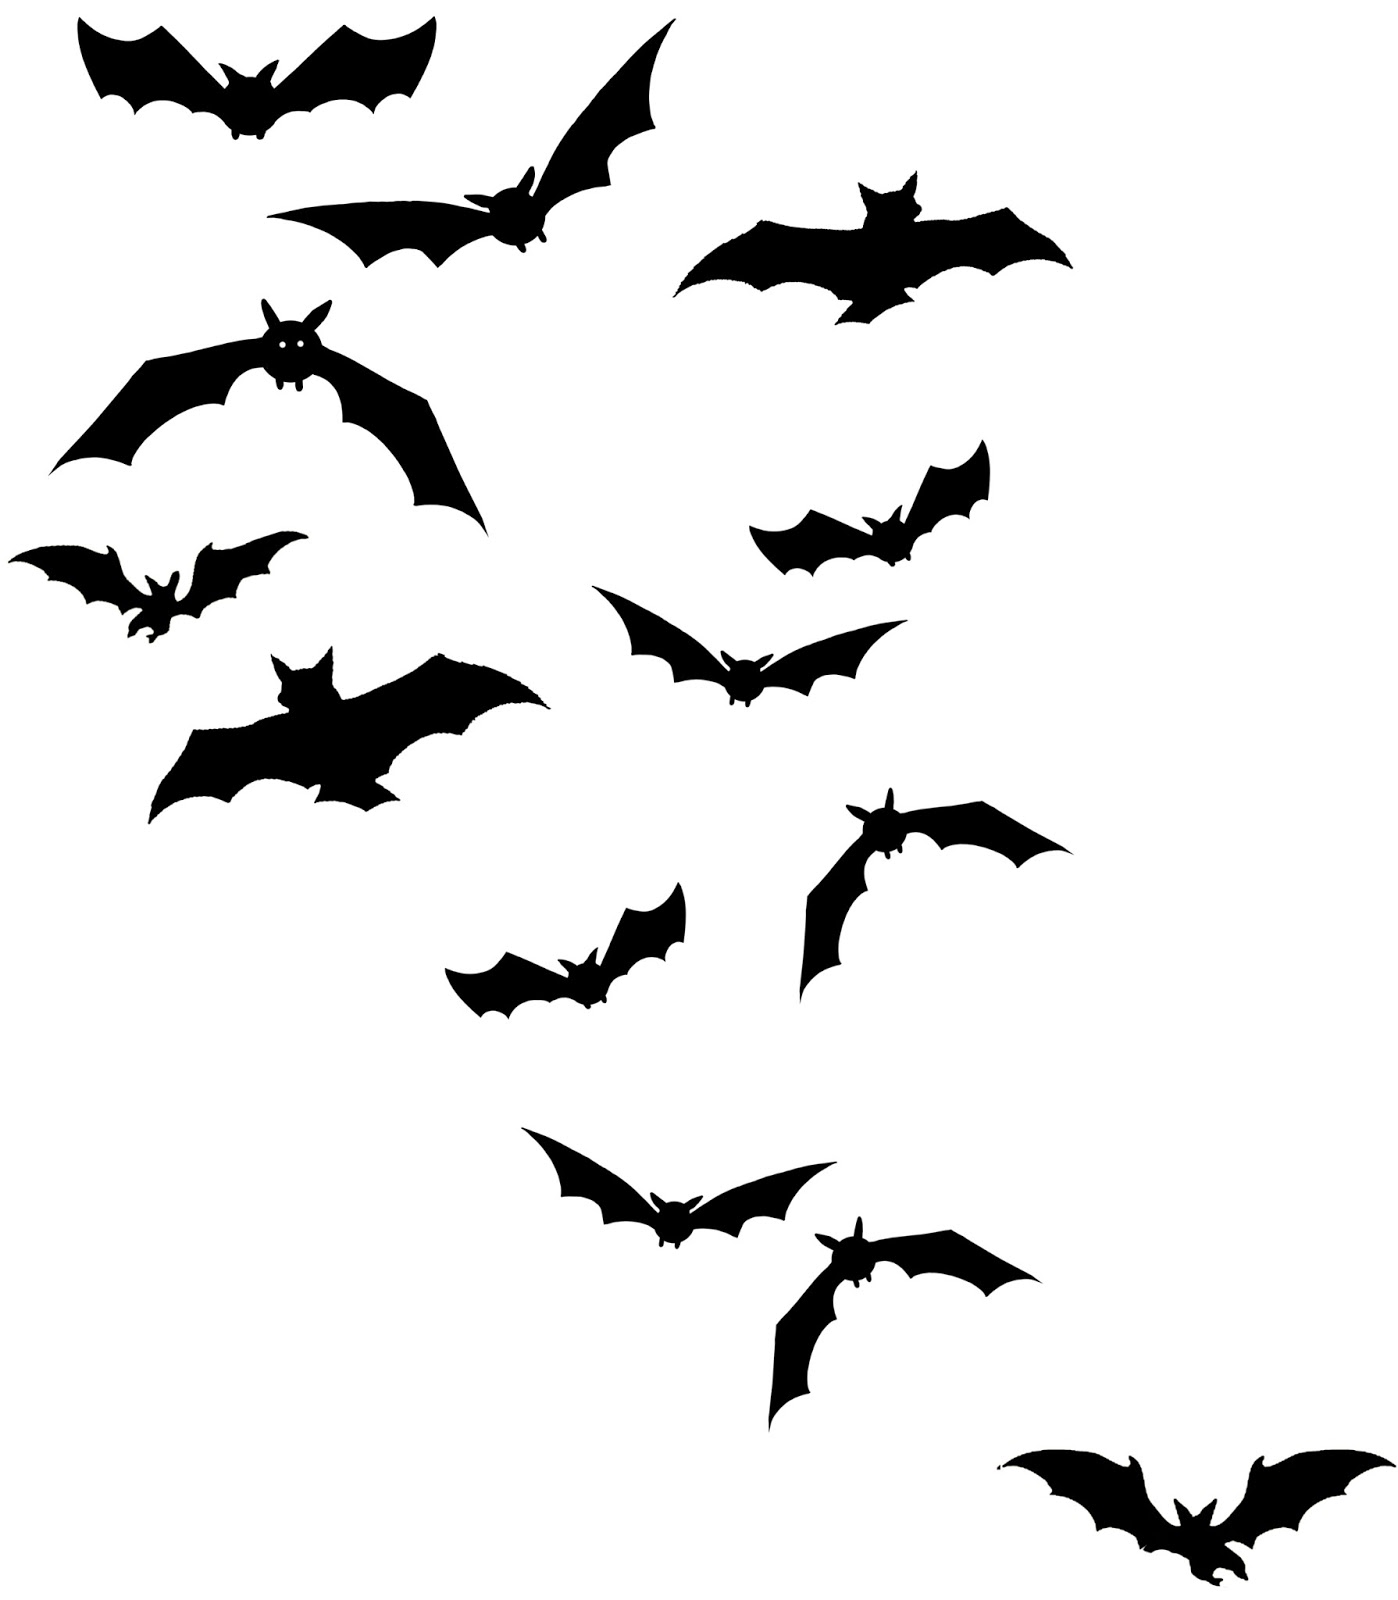 Vampire Bat Silhouette at GetDrawings.com | Free for personal use ...